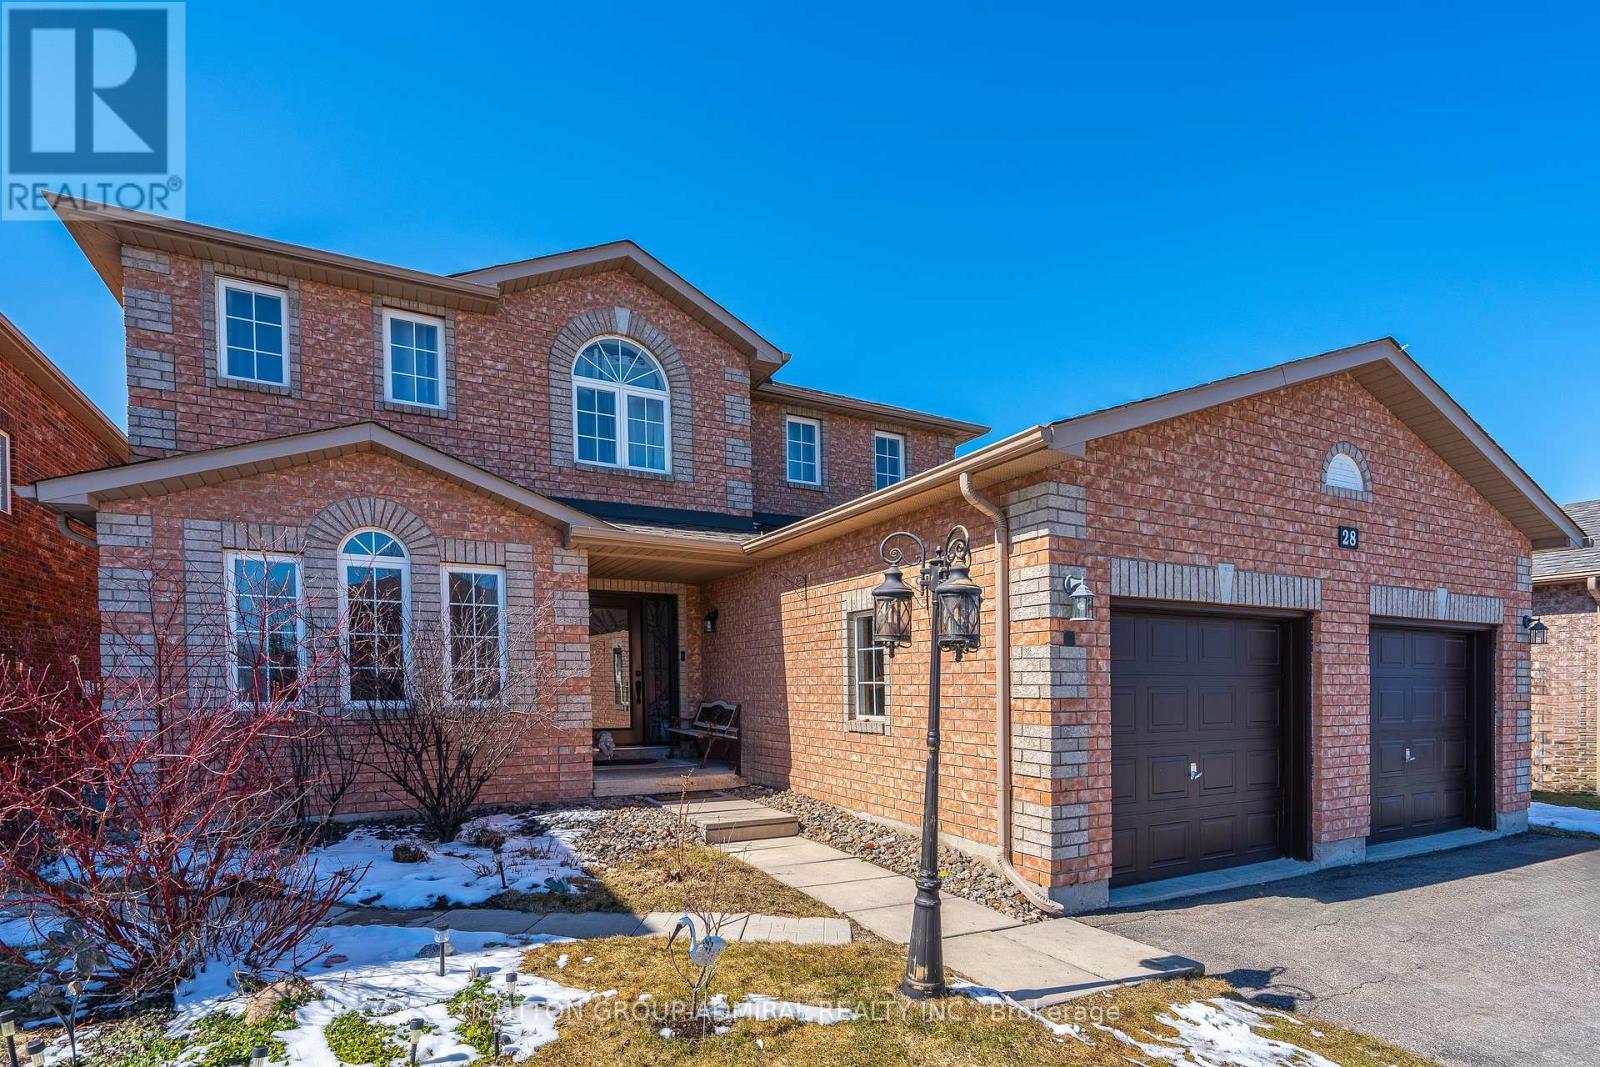 












28 SUN KING CRES

,
Barrie,




Ontario
L4M7J9

